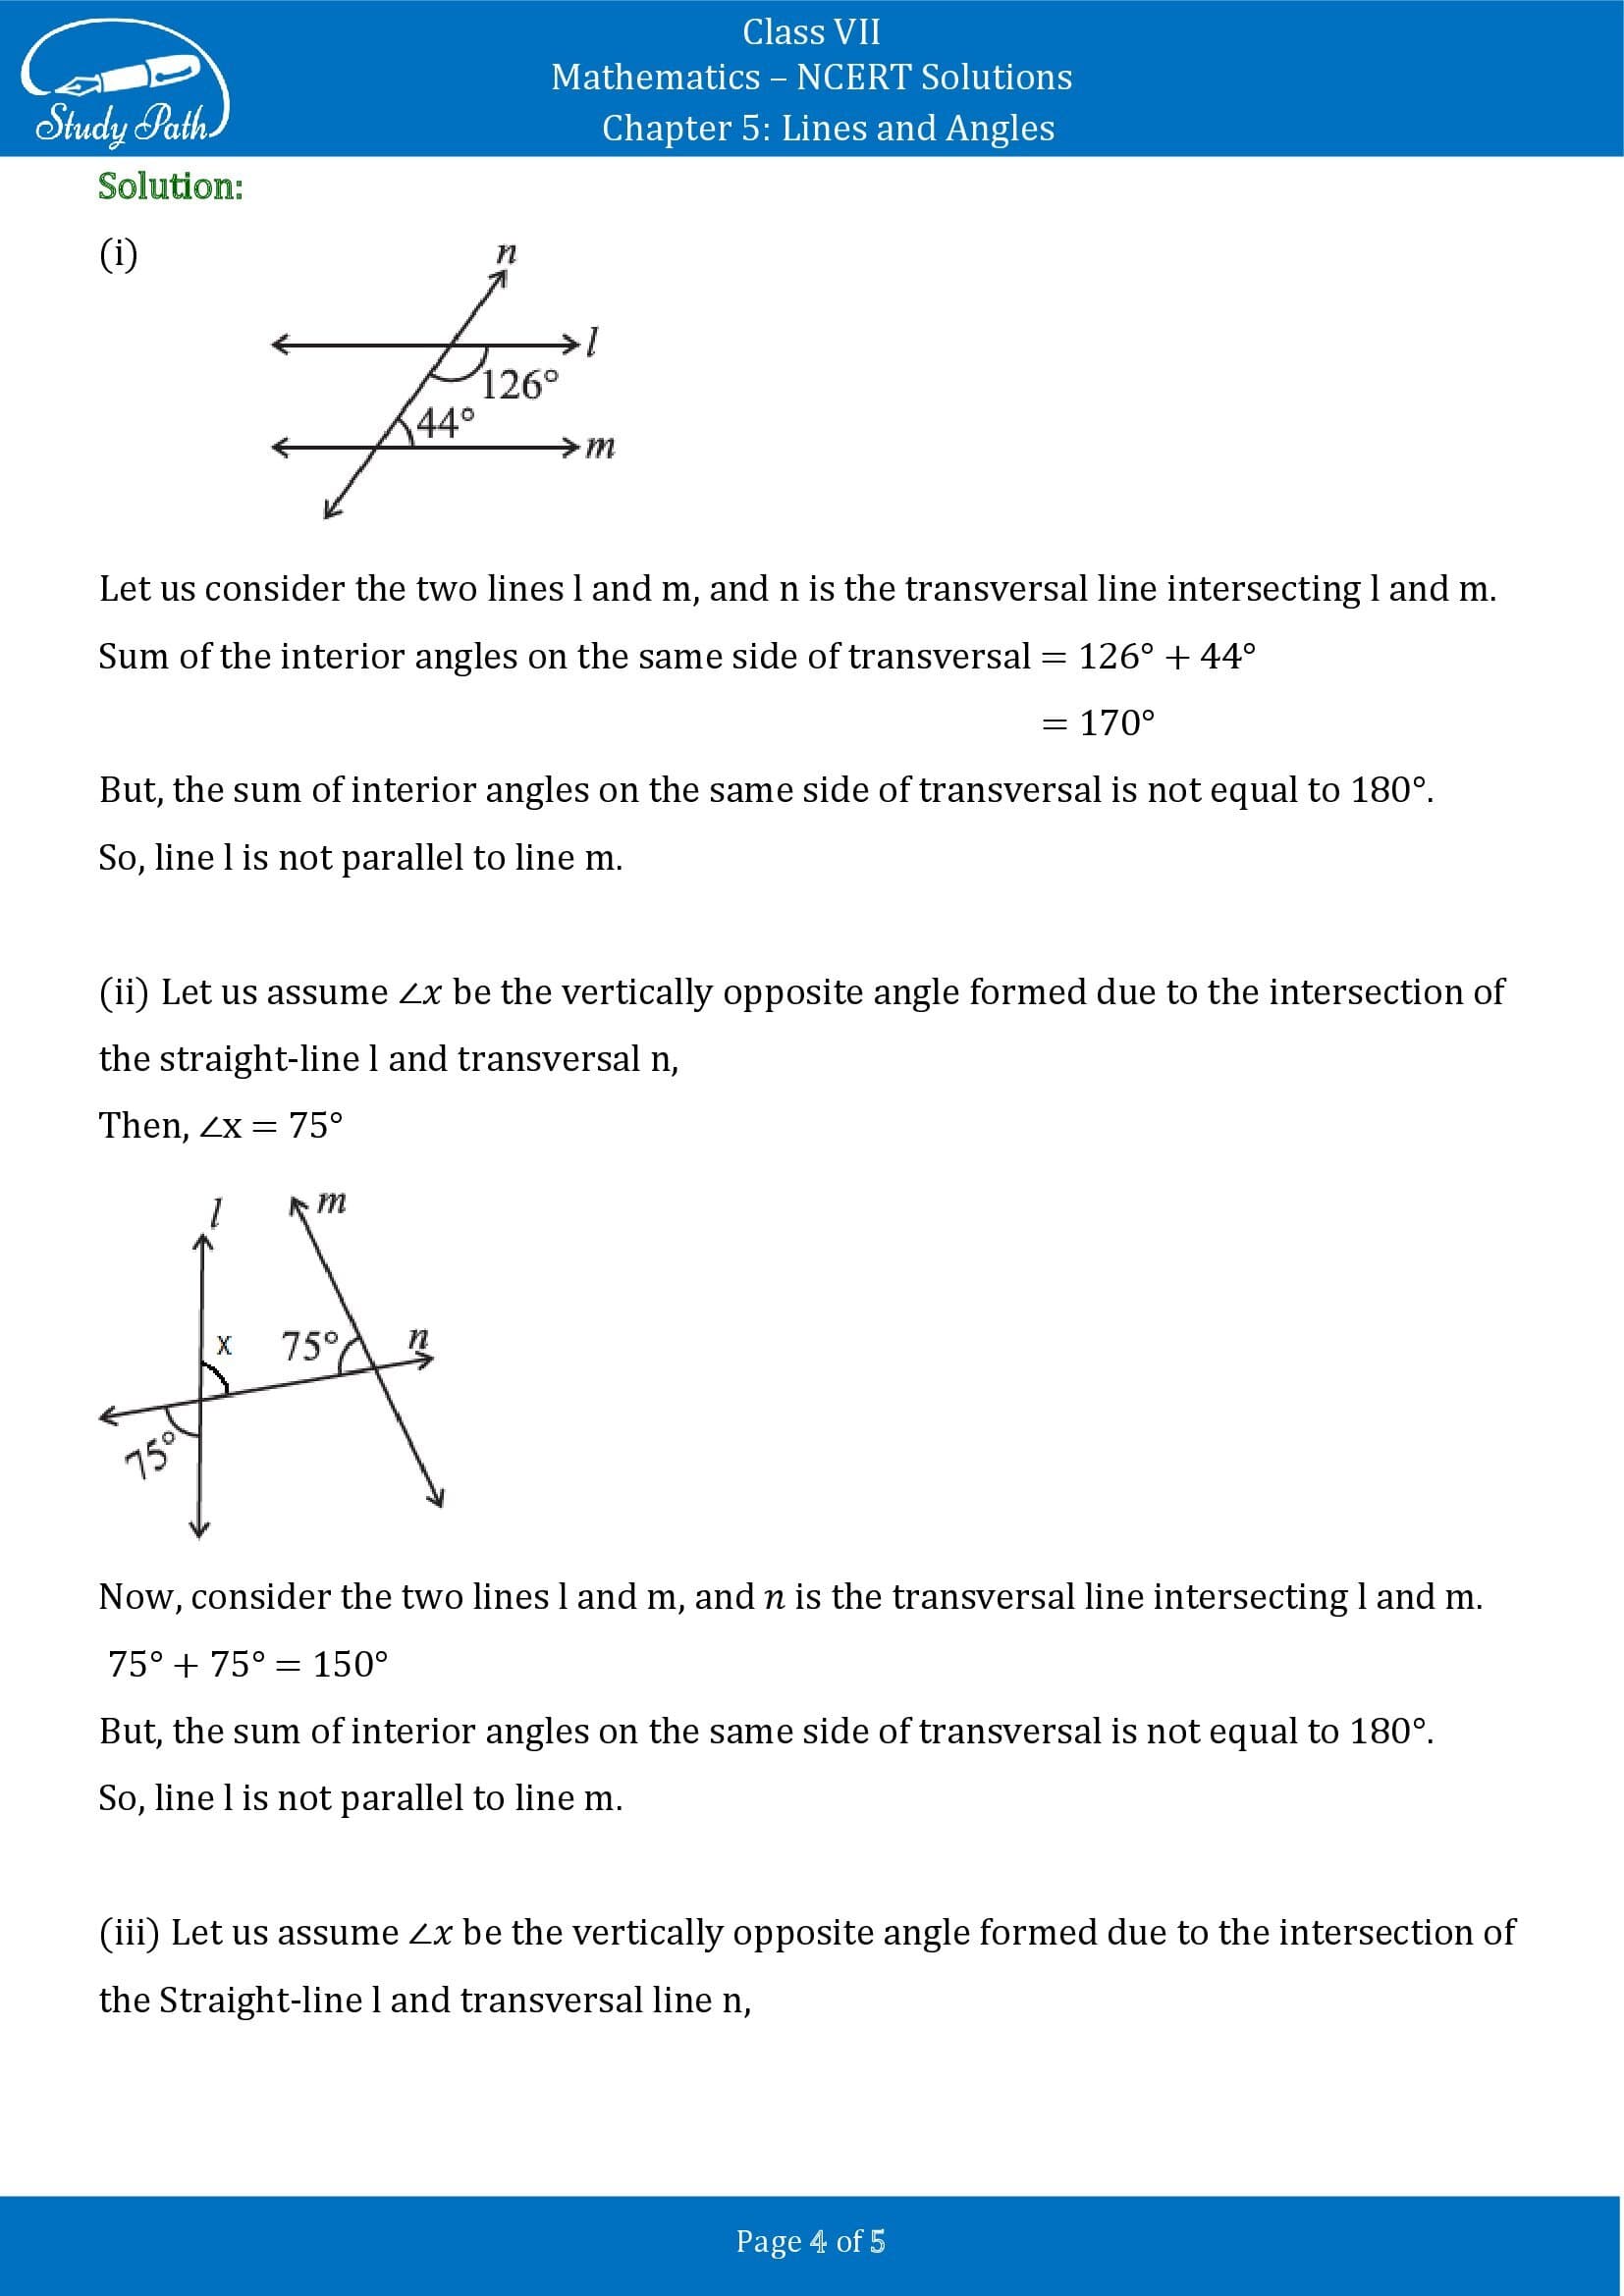 NCERT Solutions for Class 7 Maths Chapter 5 Lines and Angles Exercise 5.2 00004